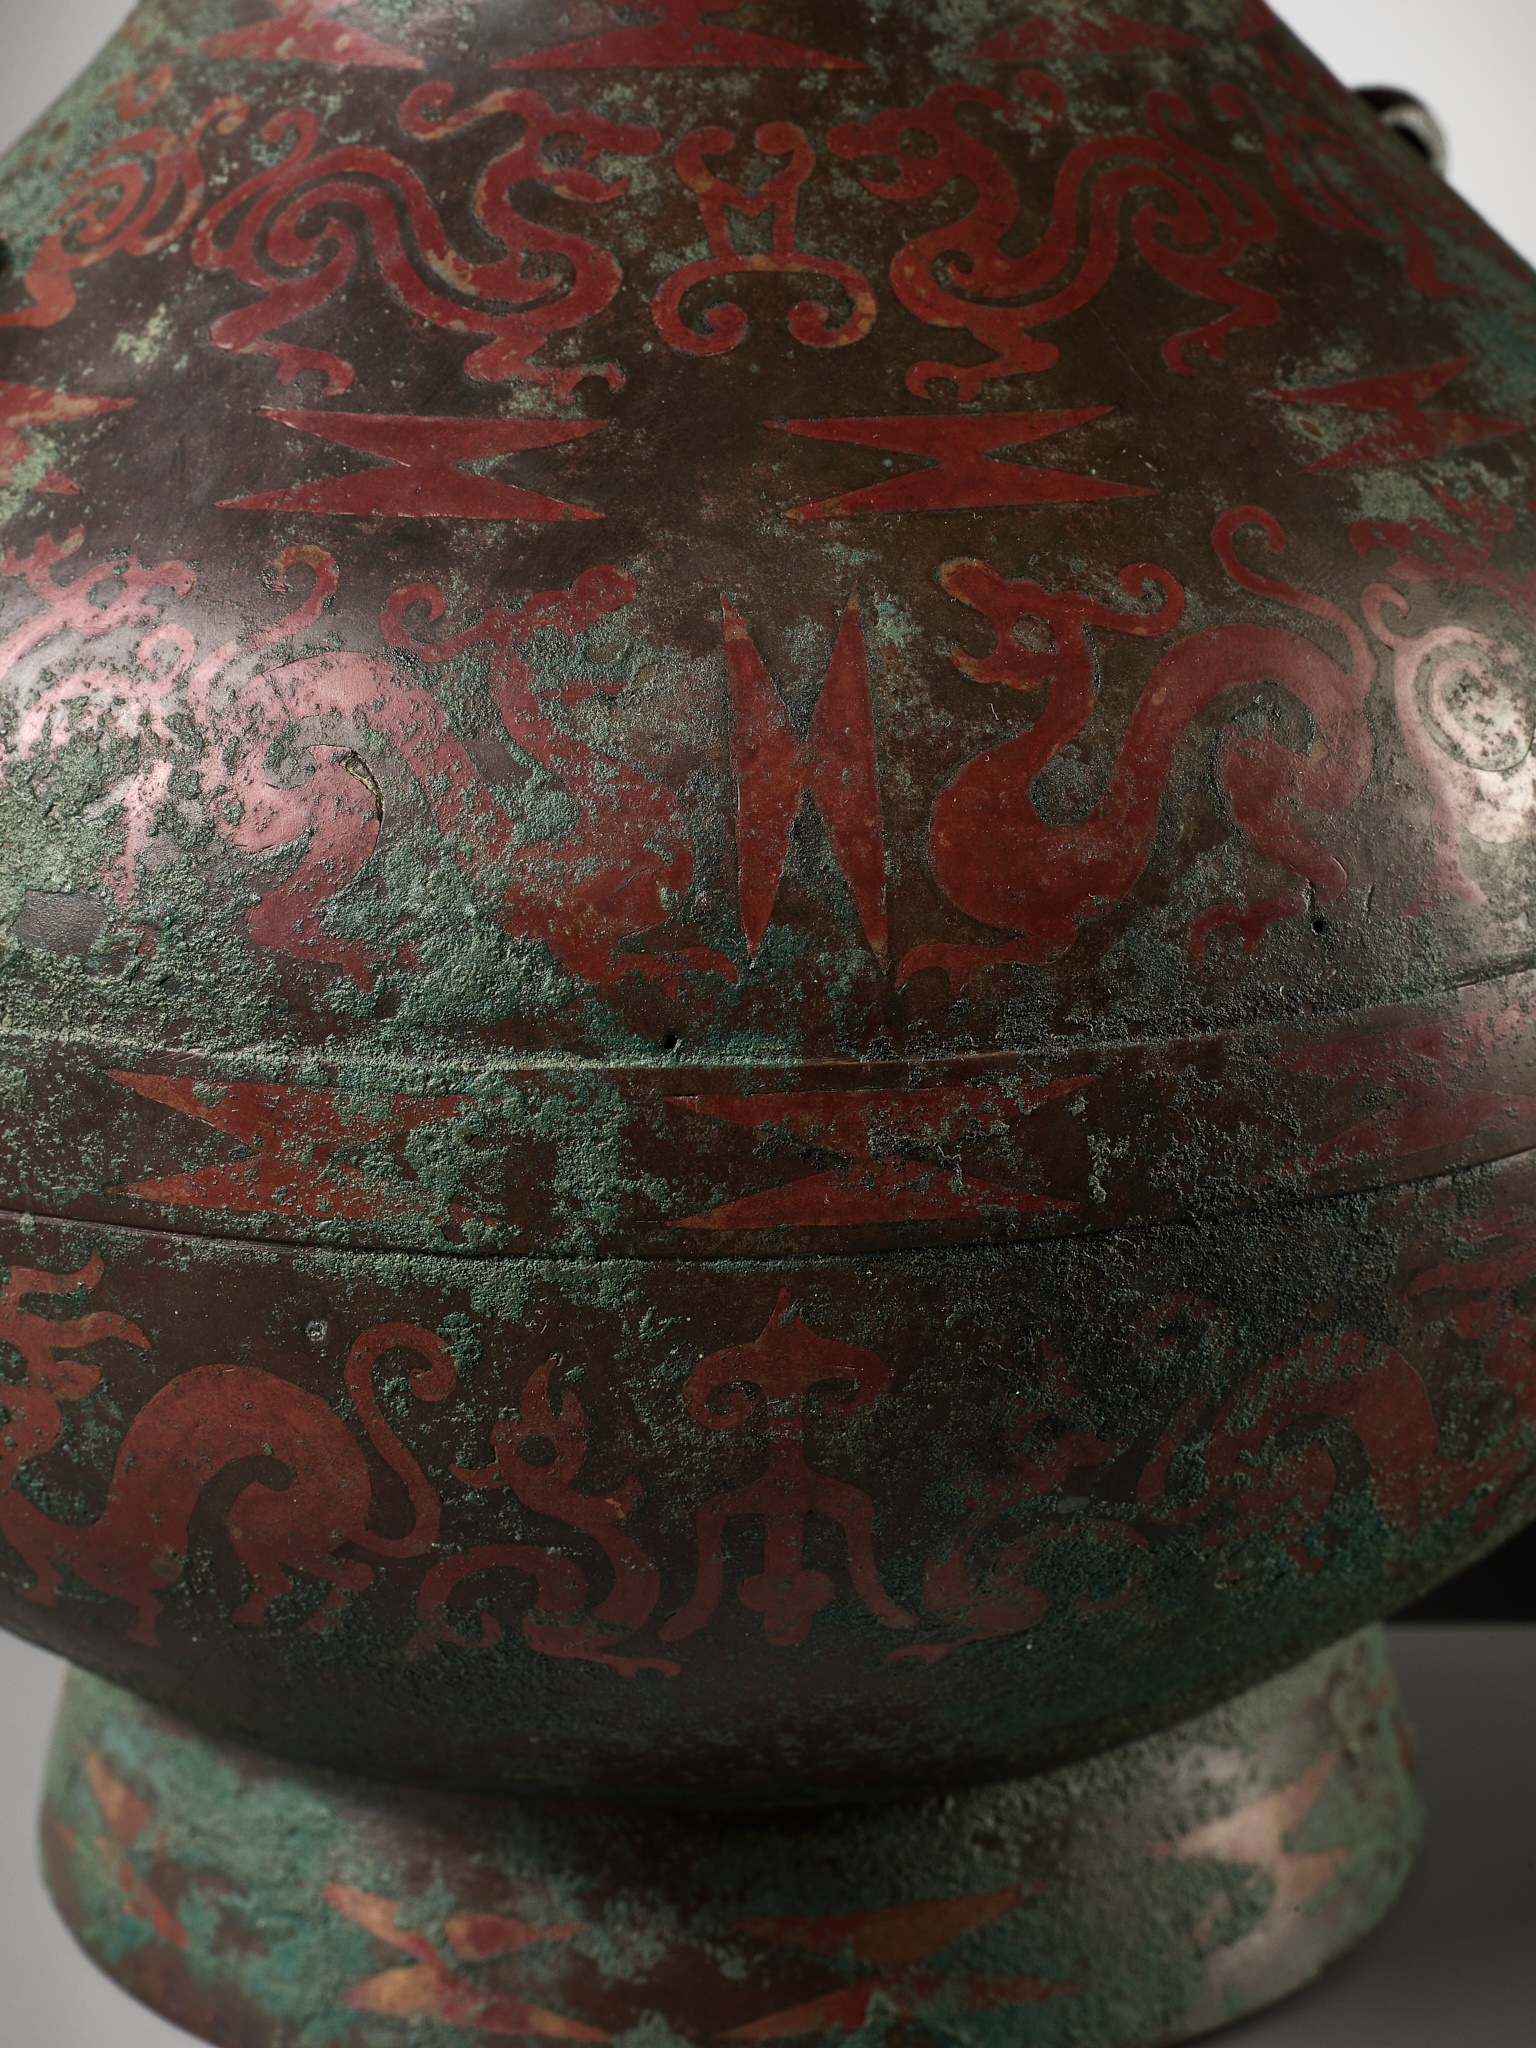 A COPPER-INLAID BRONZE RITUAL WINE VESSEL AND COVER, HU, EASTERN ZHOU DYNASTY - Image 20 of 27